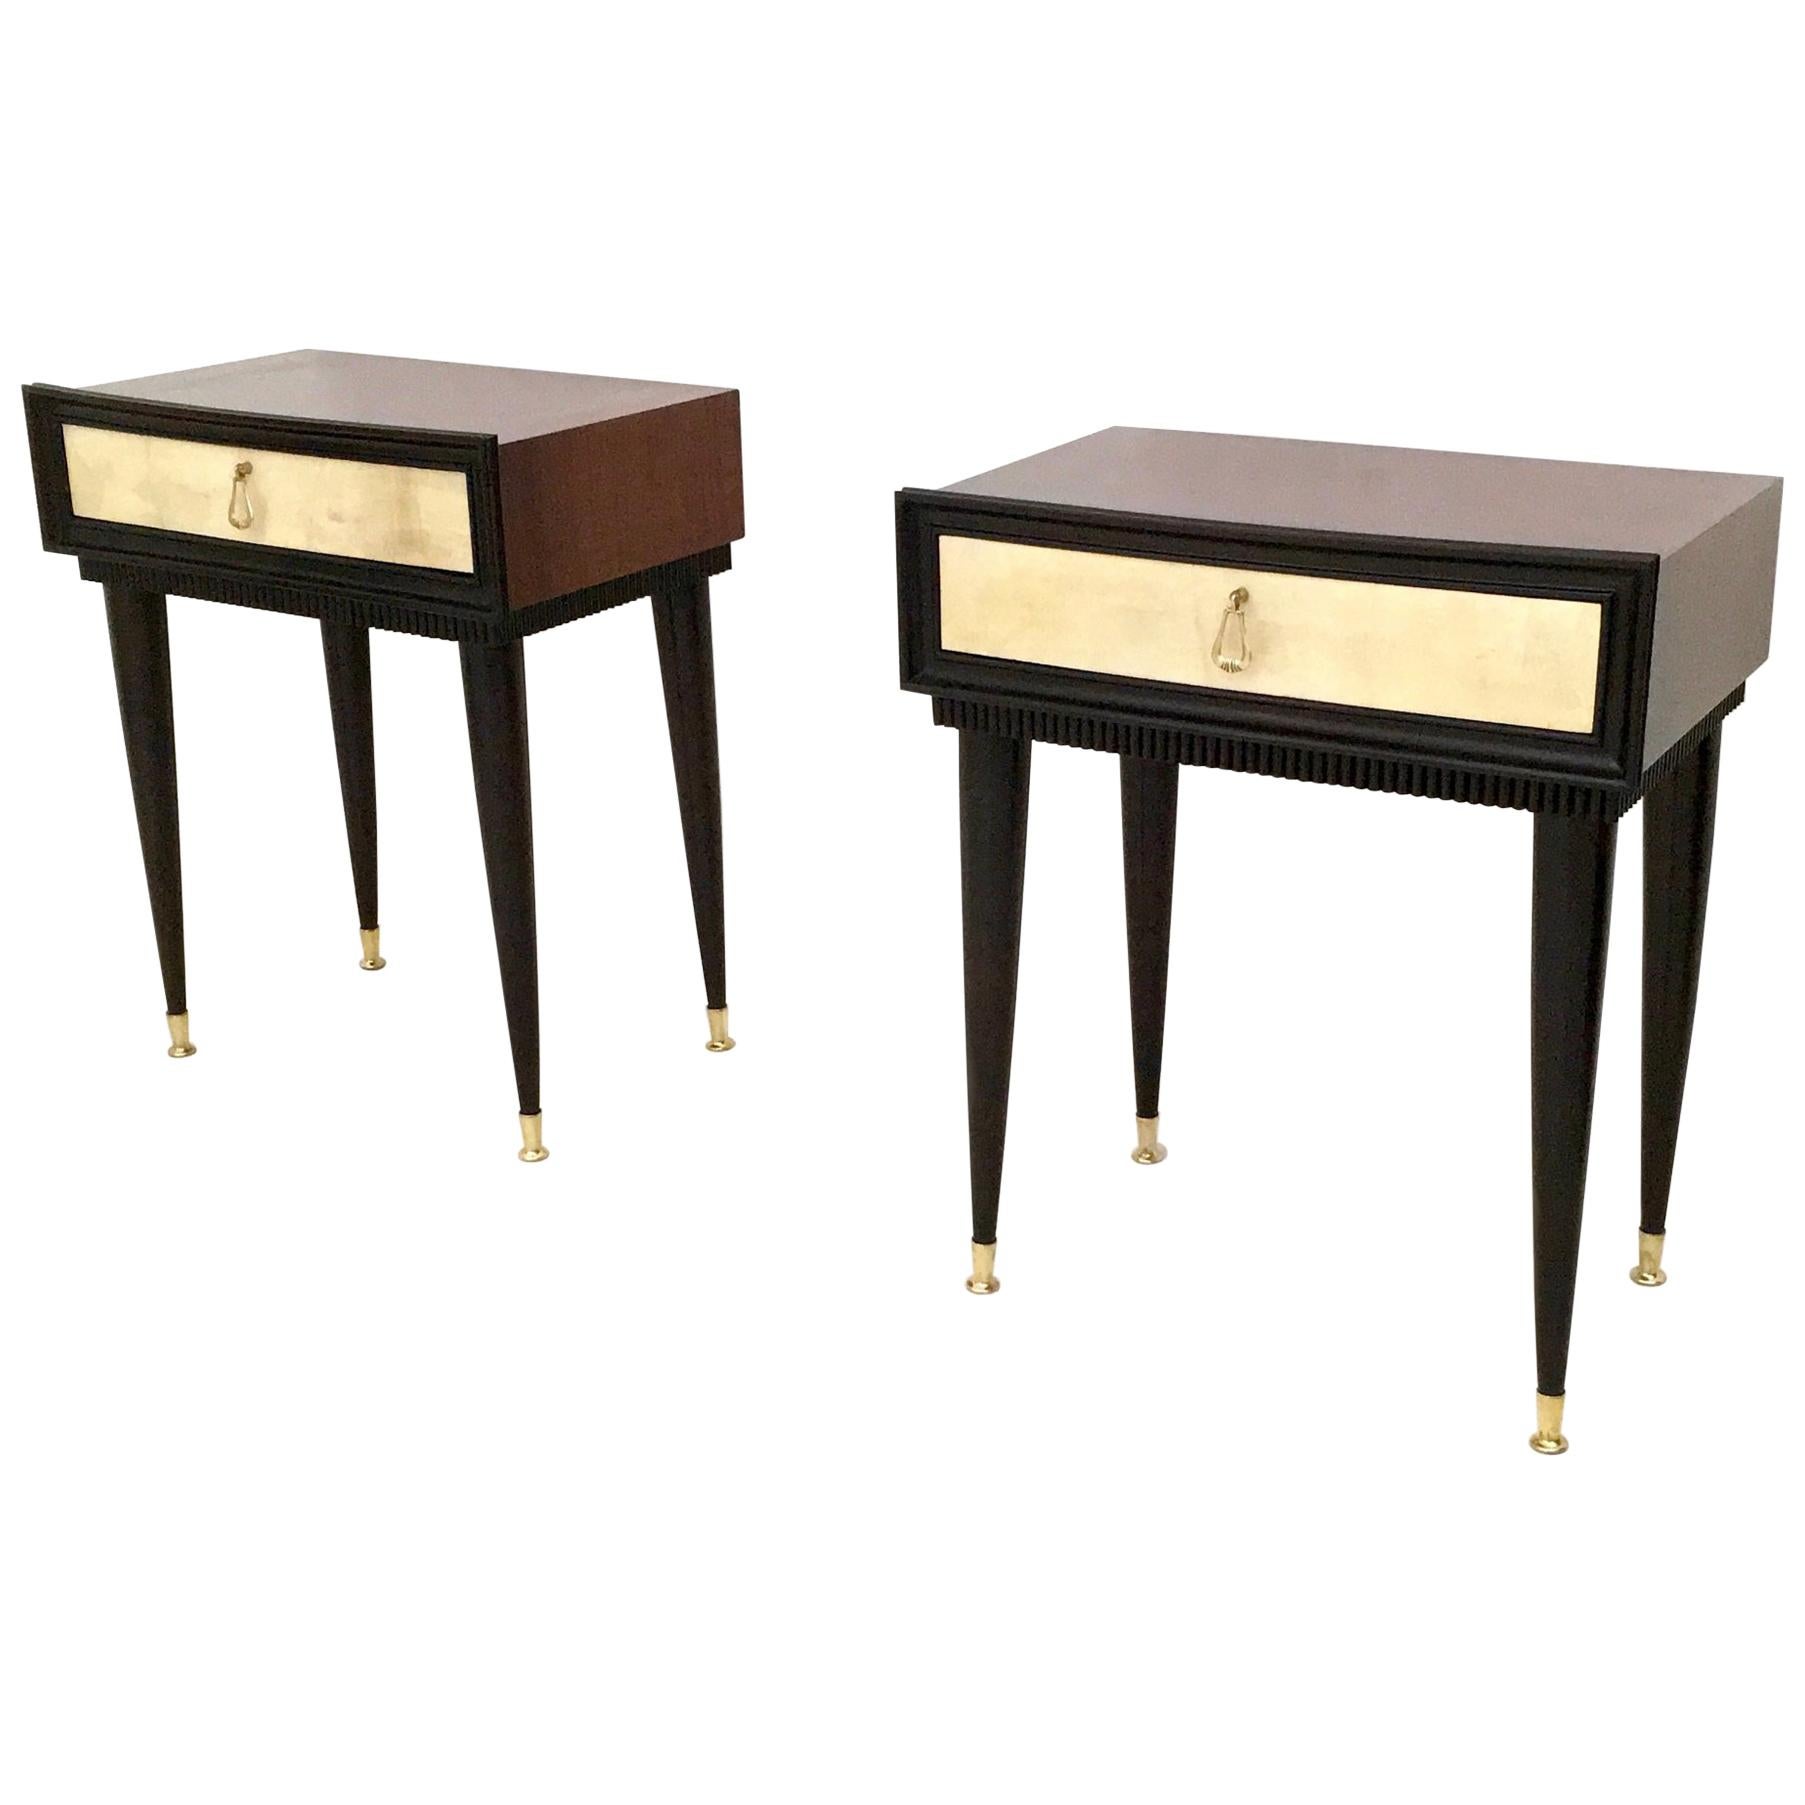 Pair of Wooden Nightstands with Parchment Drawers, Italy, 1950s